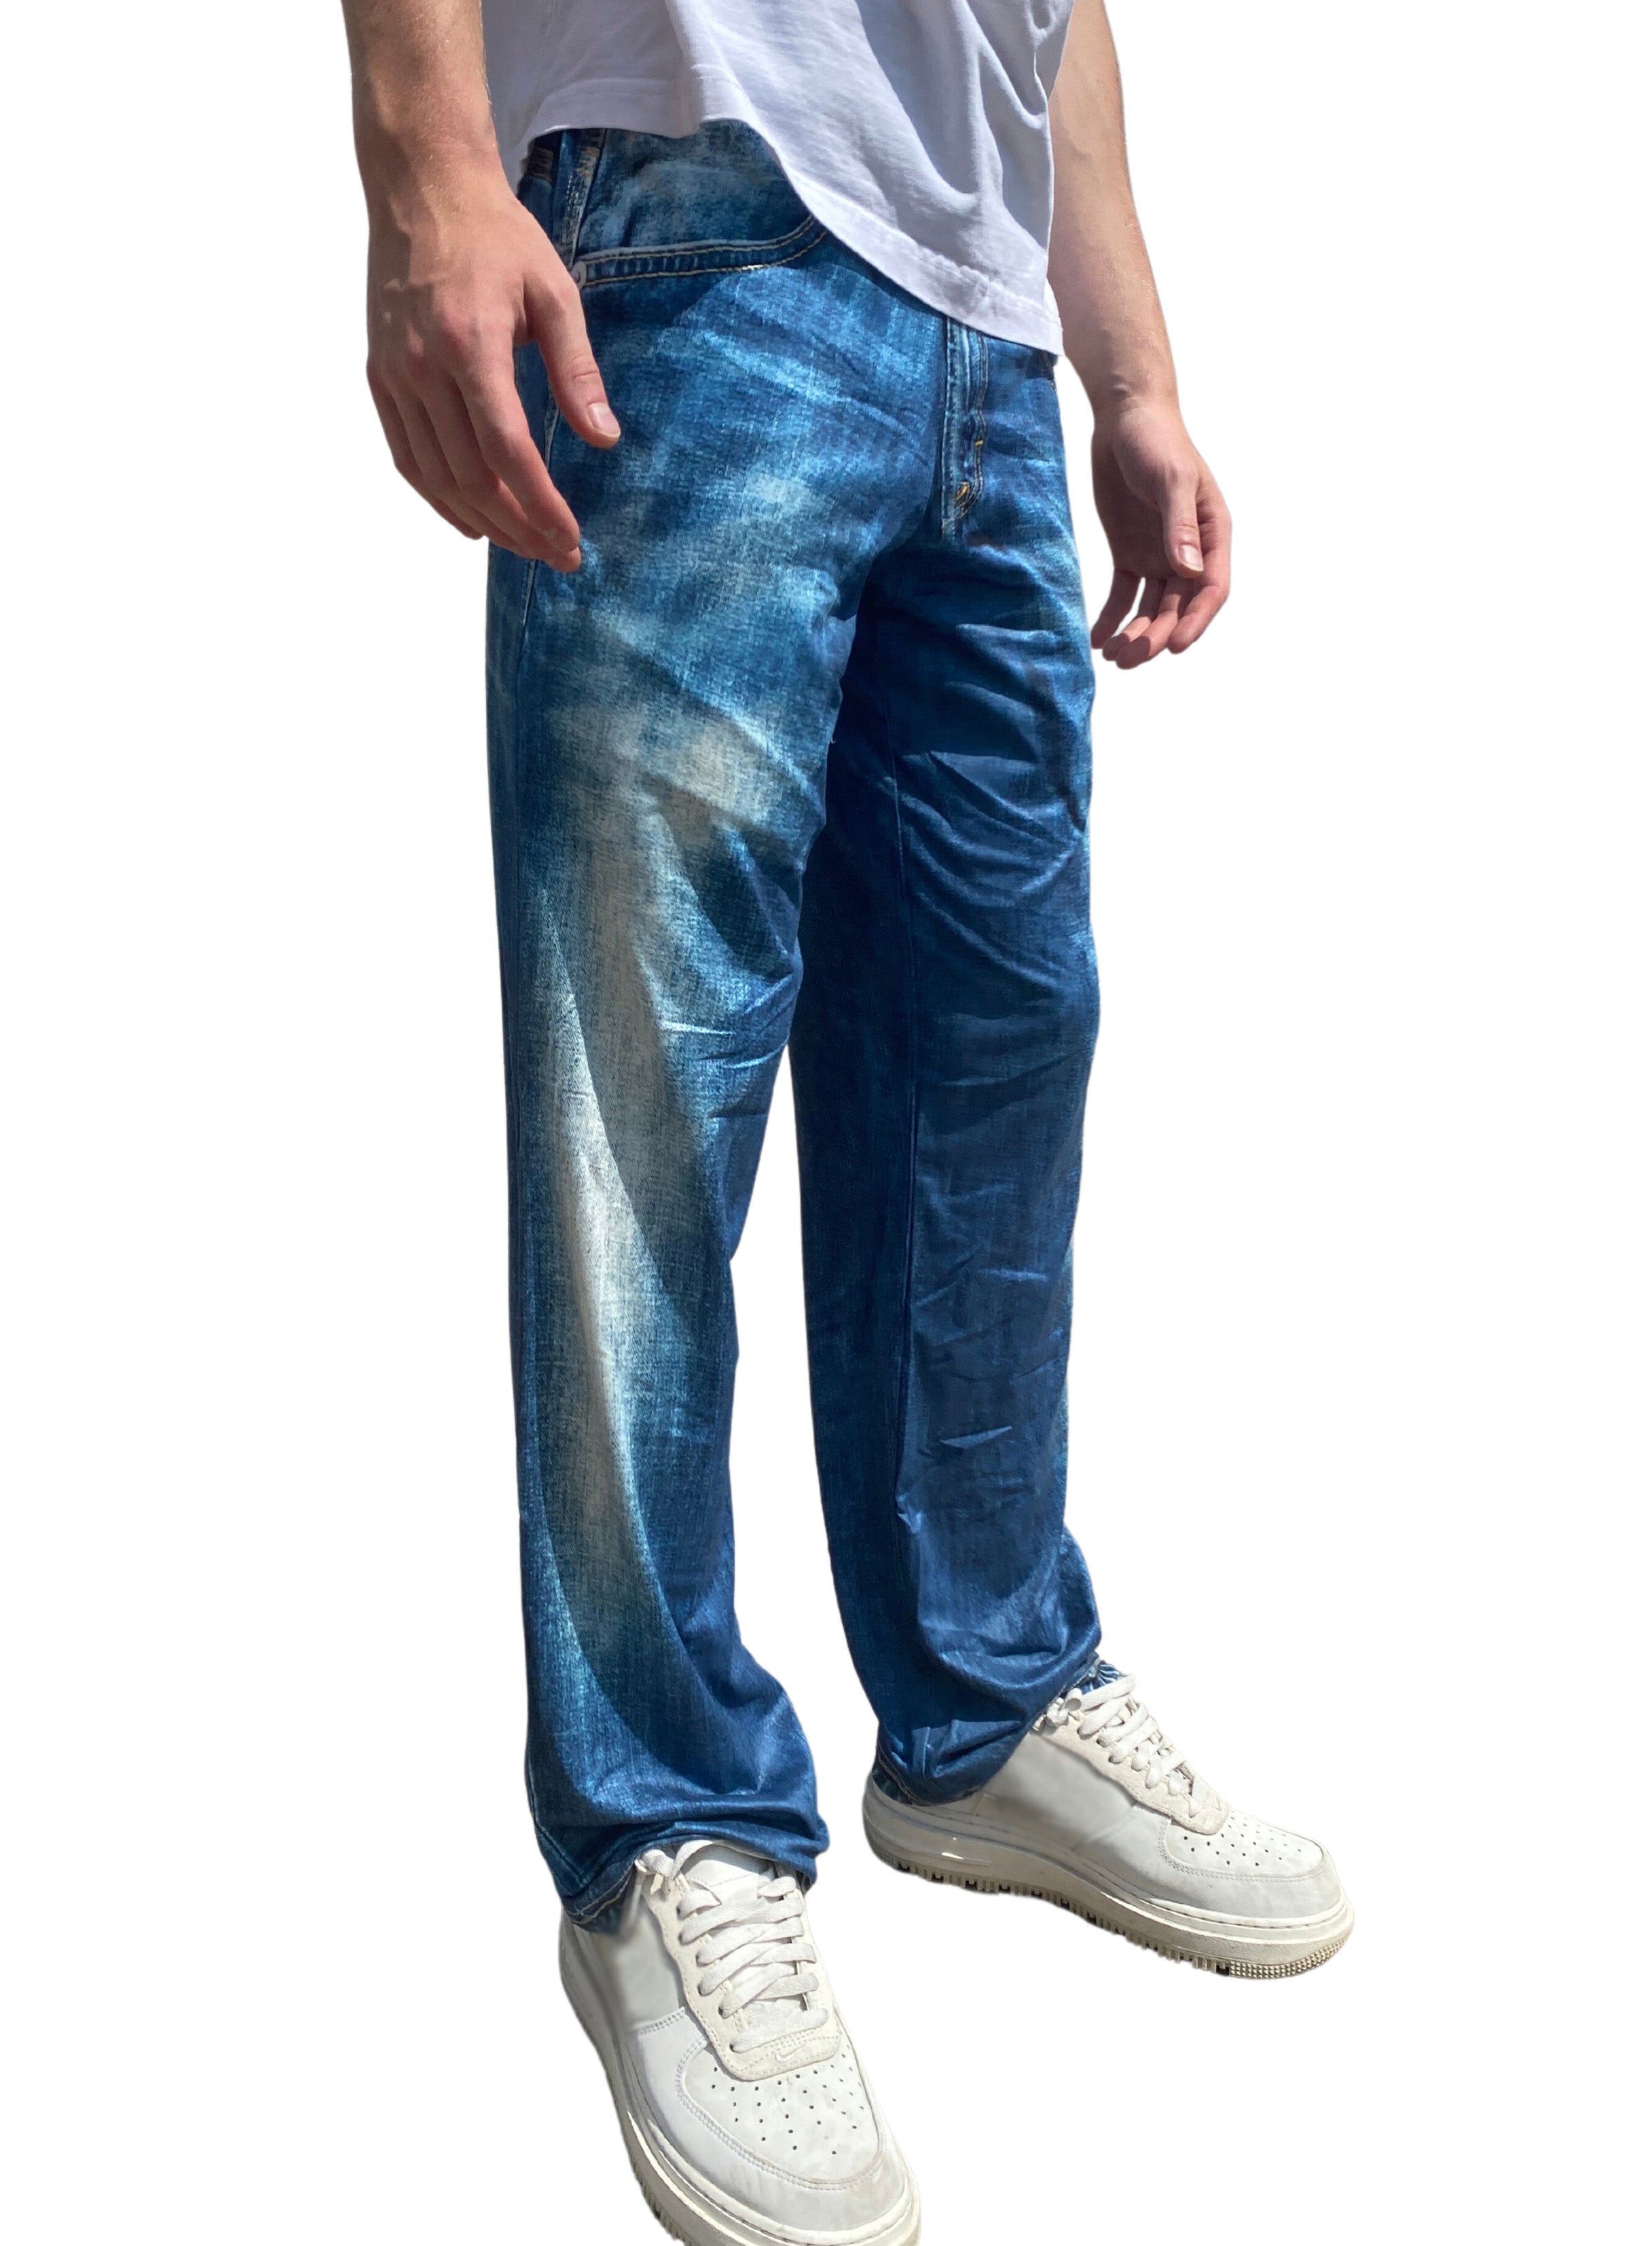 Blue Jeans Pajama Lounge Pants right side view on model (waist down)